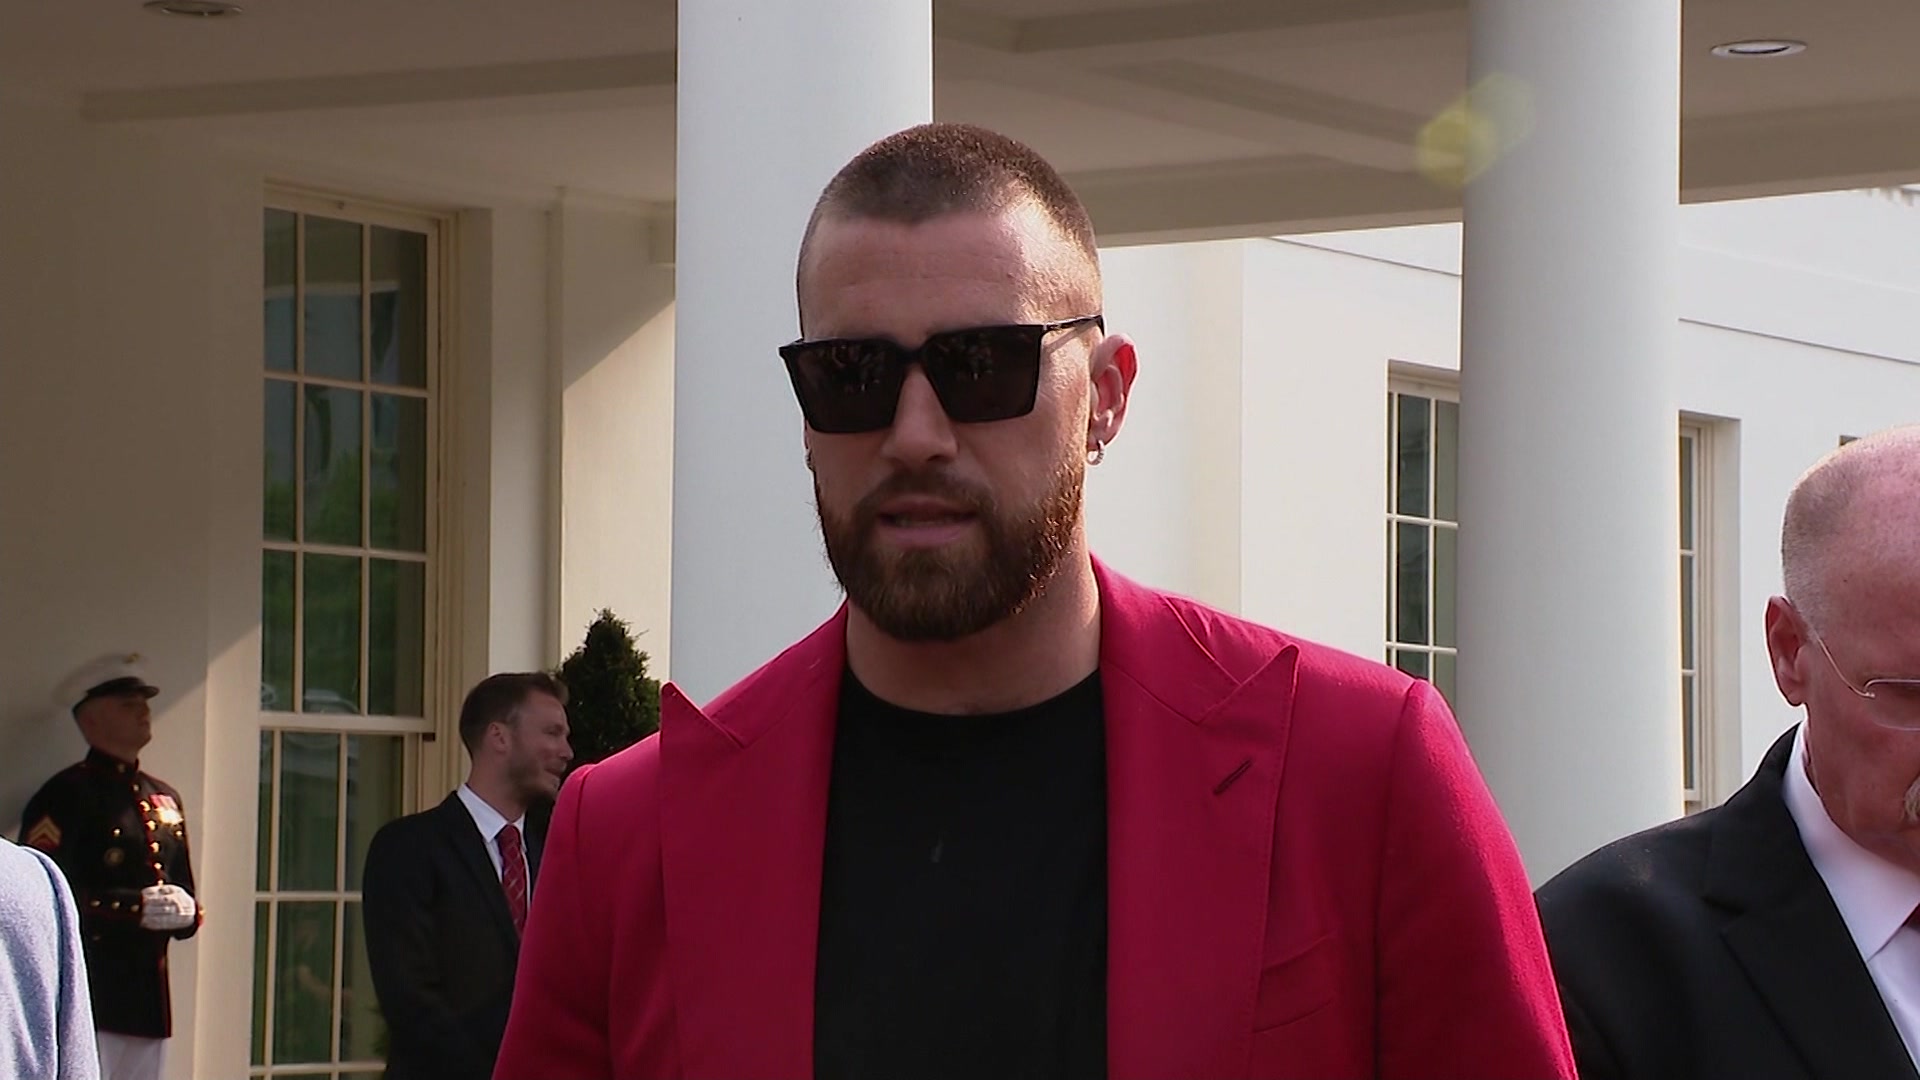 Kelce Jersey Sales Spike After Taylor Swift Attends NFL Game